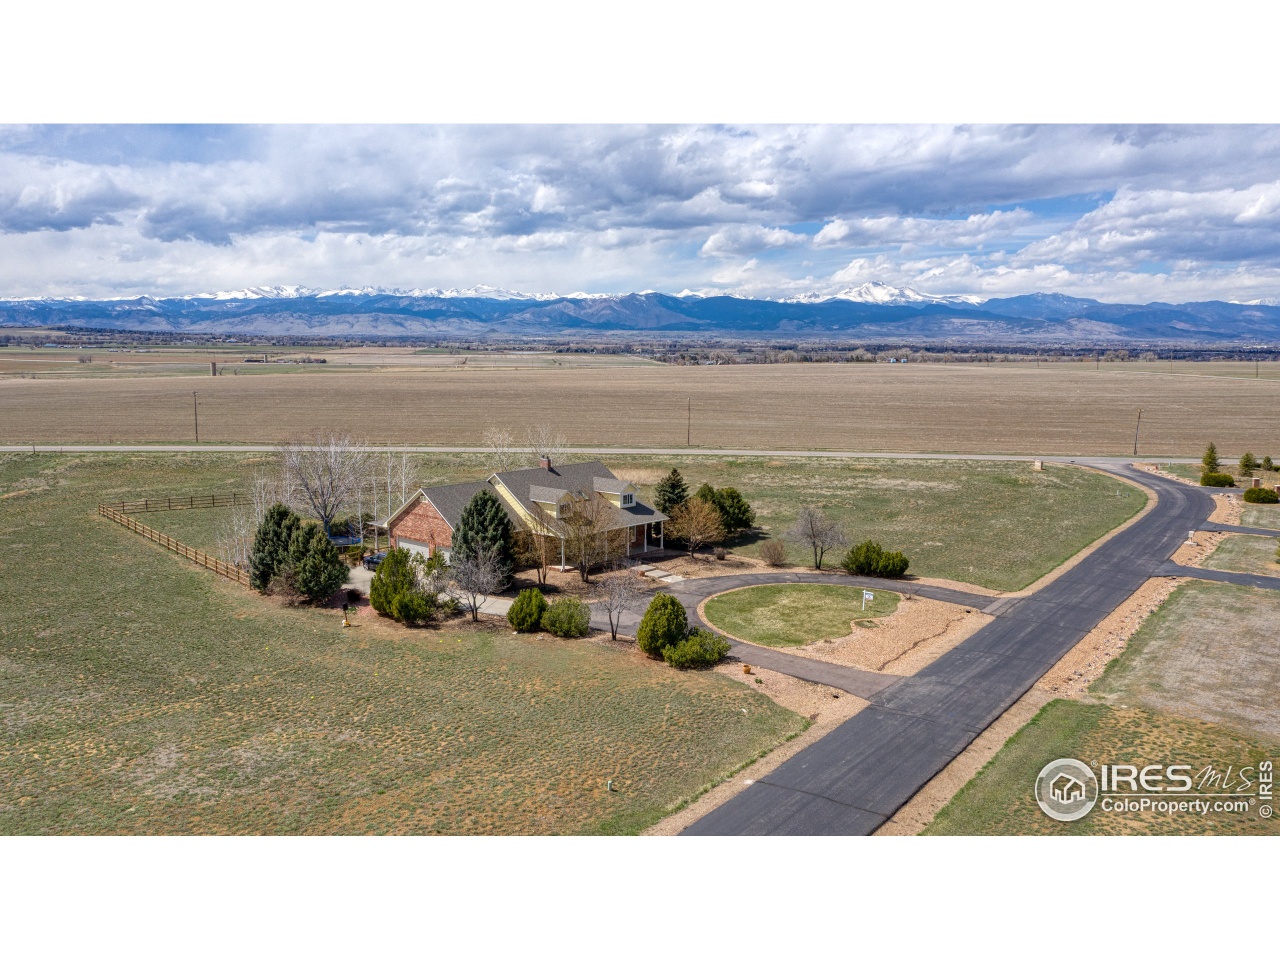 4 br, 2.5 bath House - 7415 Rodeo Drive - House Rental in Longmont, CO